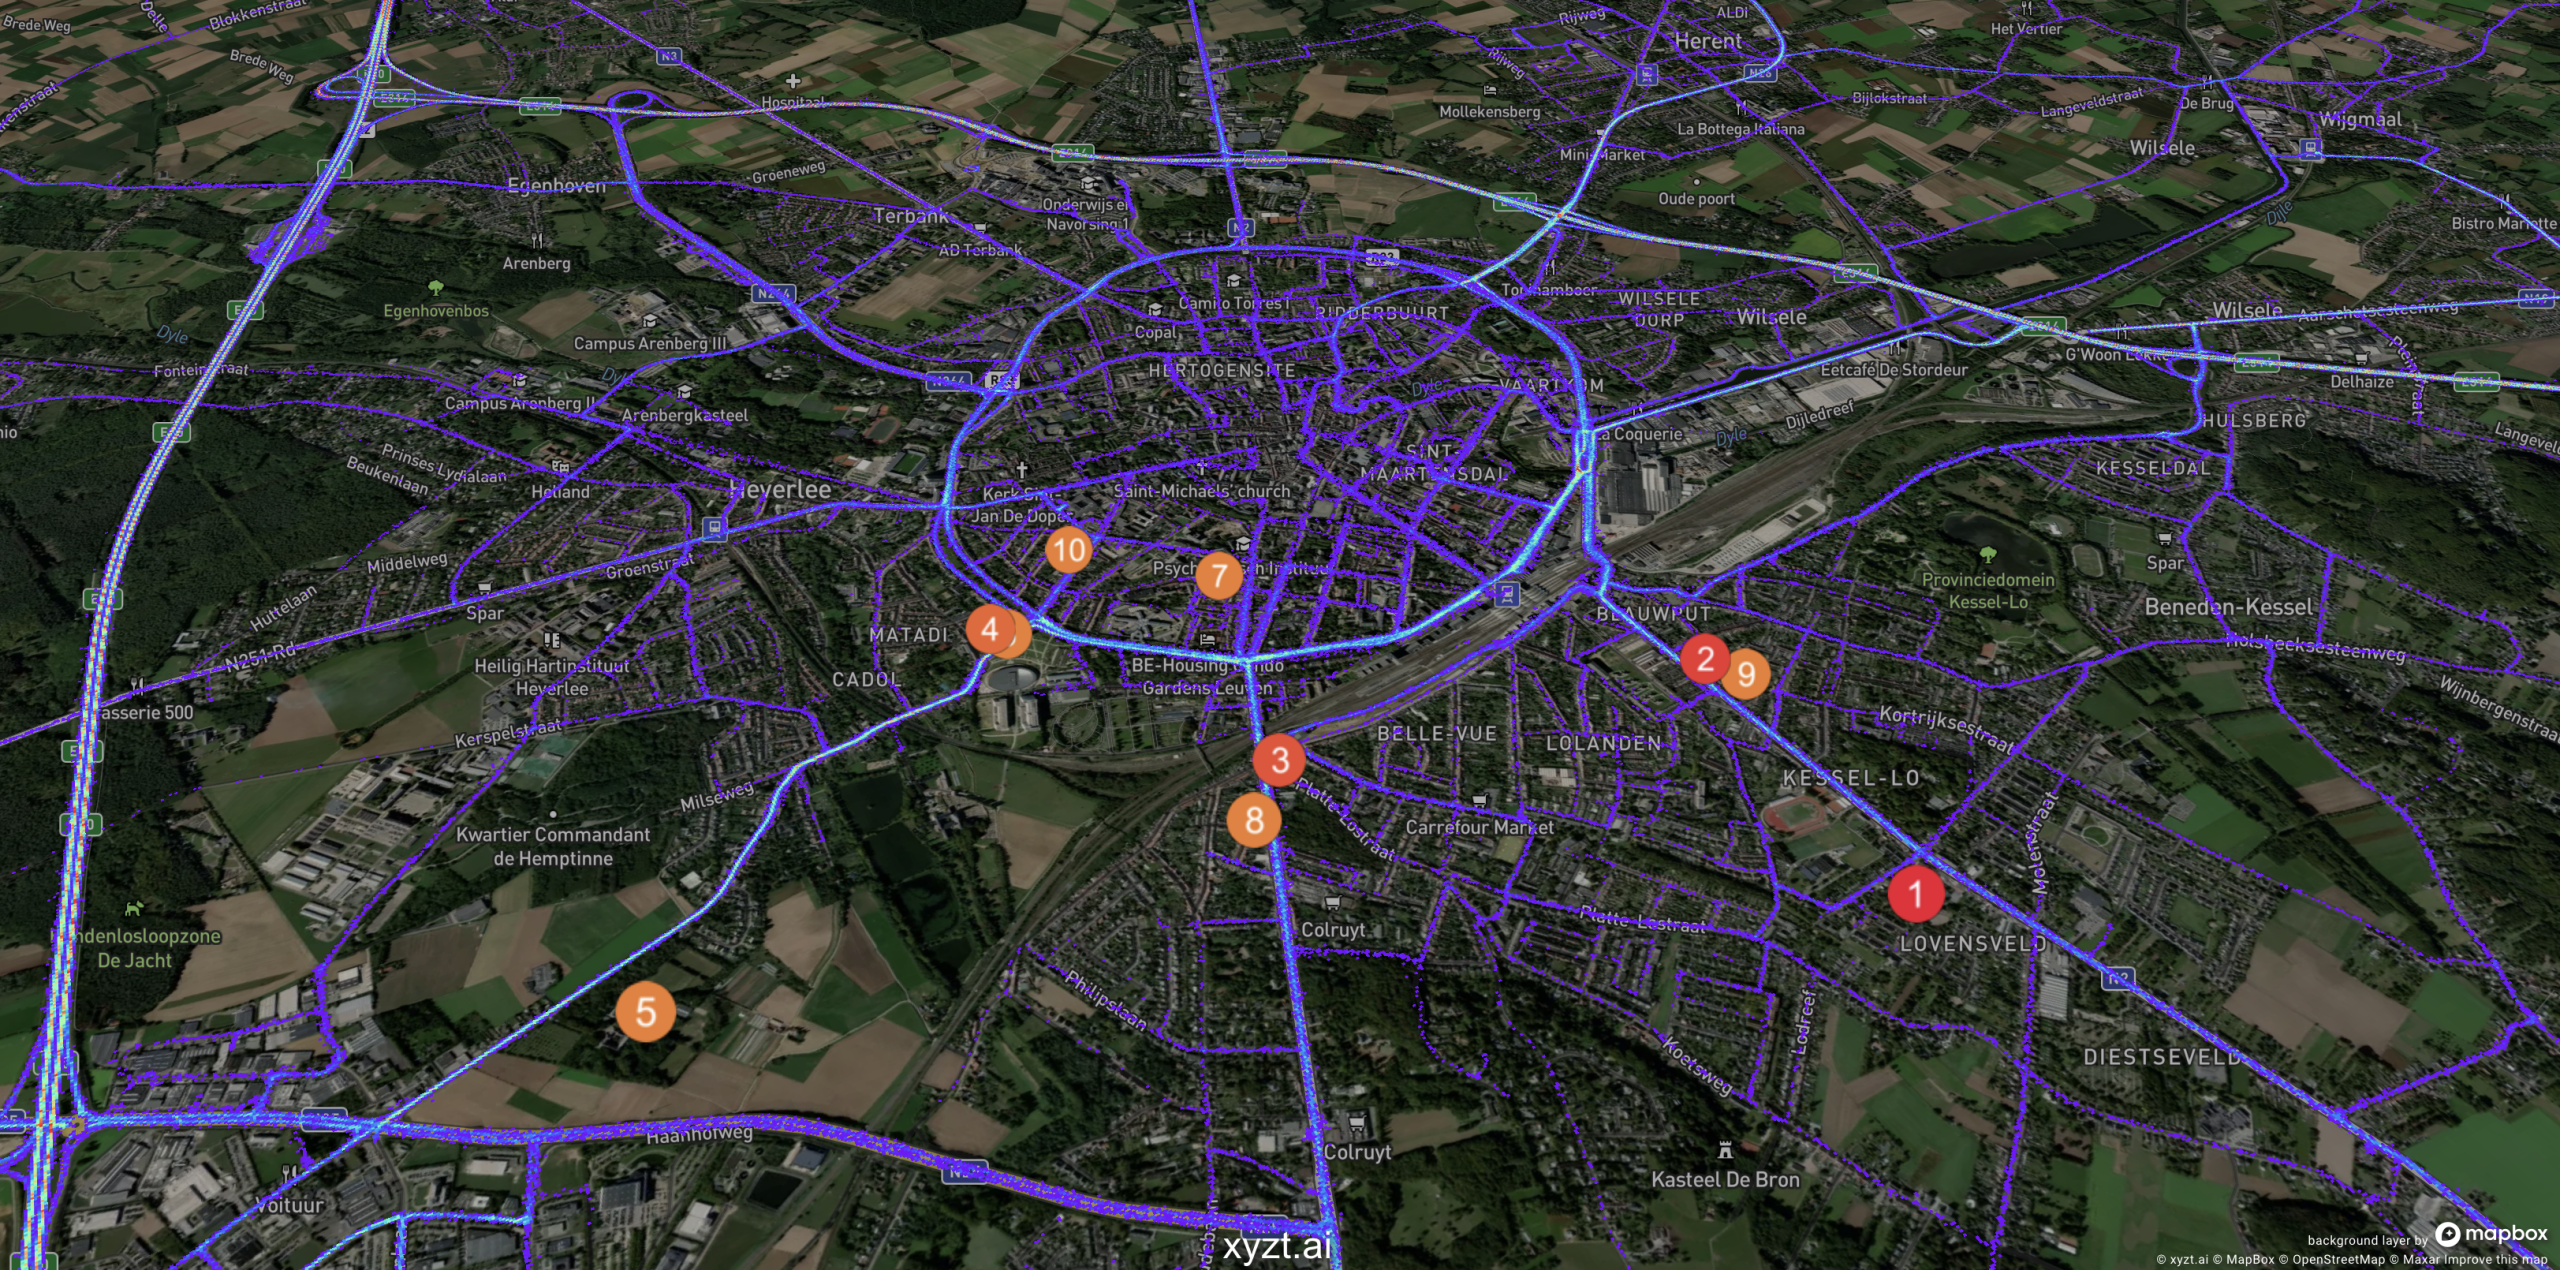 Combining floating vehicle data with points of interest data, such as the location of schools, provides municipalities with easy insights on which school areas see most heavy traffic during school morning and evening hours. Data from xyzt.ai and Open Street Maps.